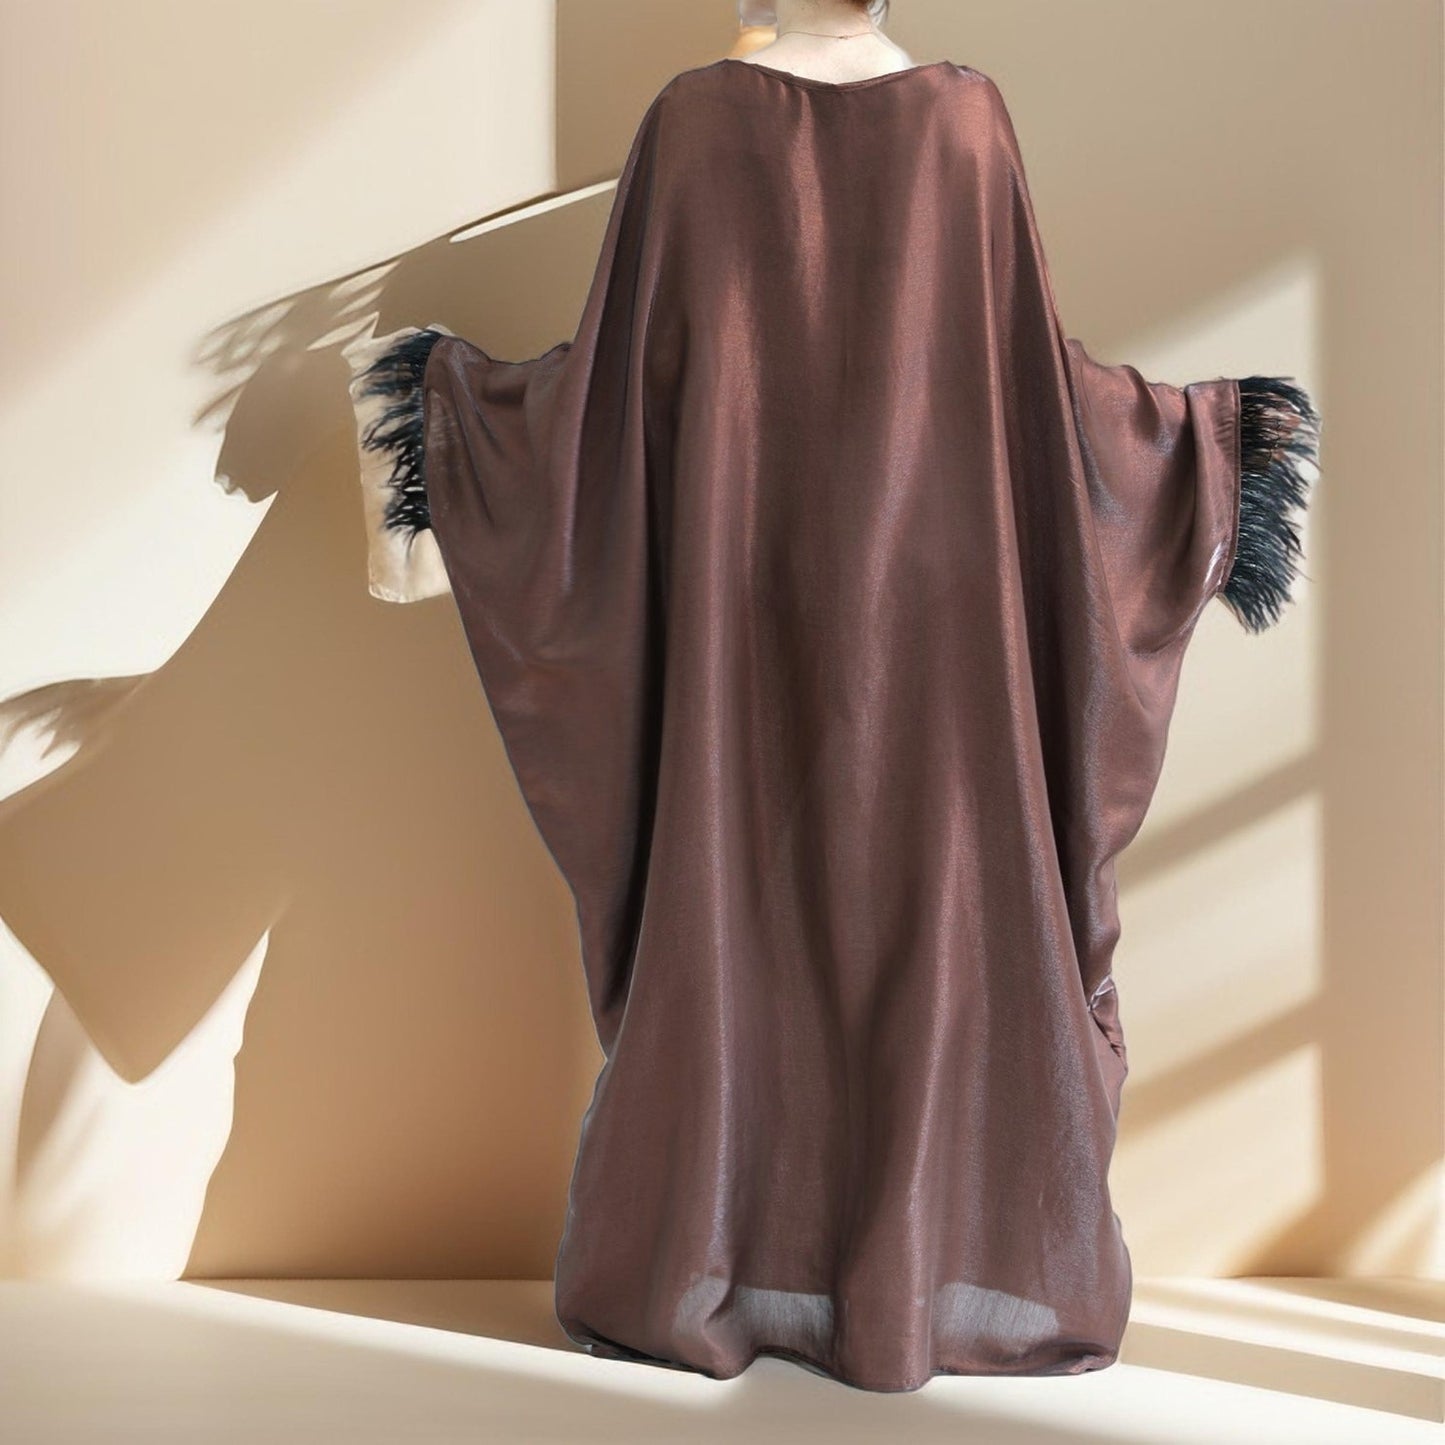 Evening batwing abaya dress with feather sleeves - Try Modest Limited 